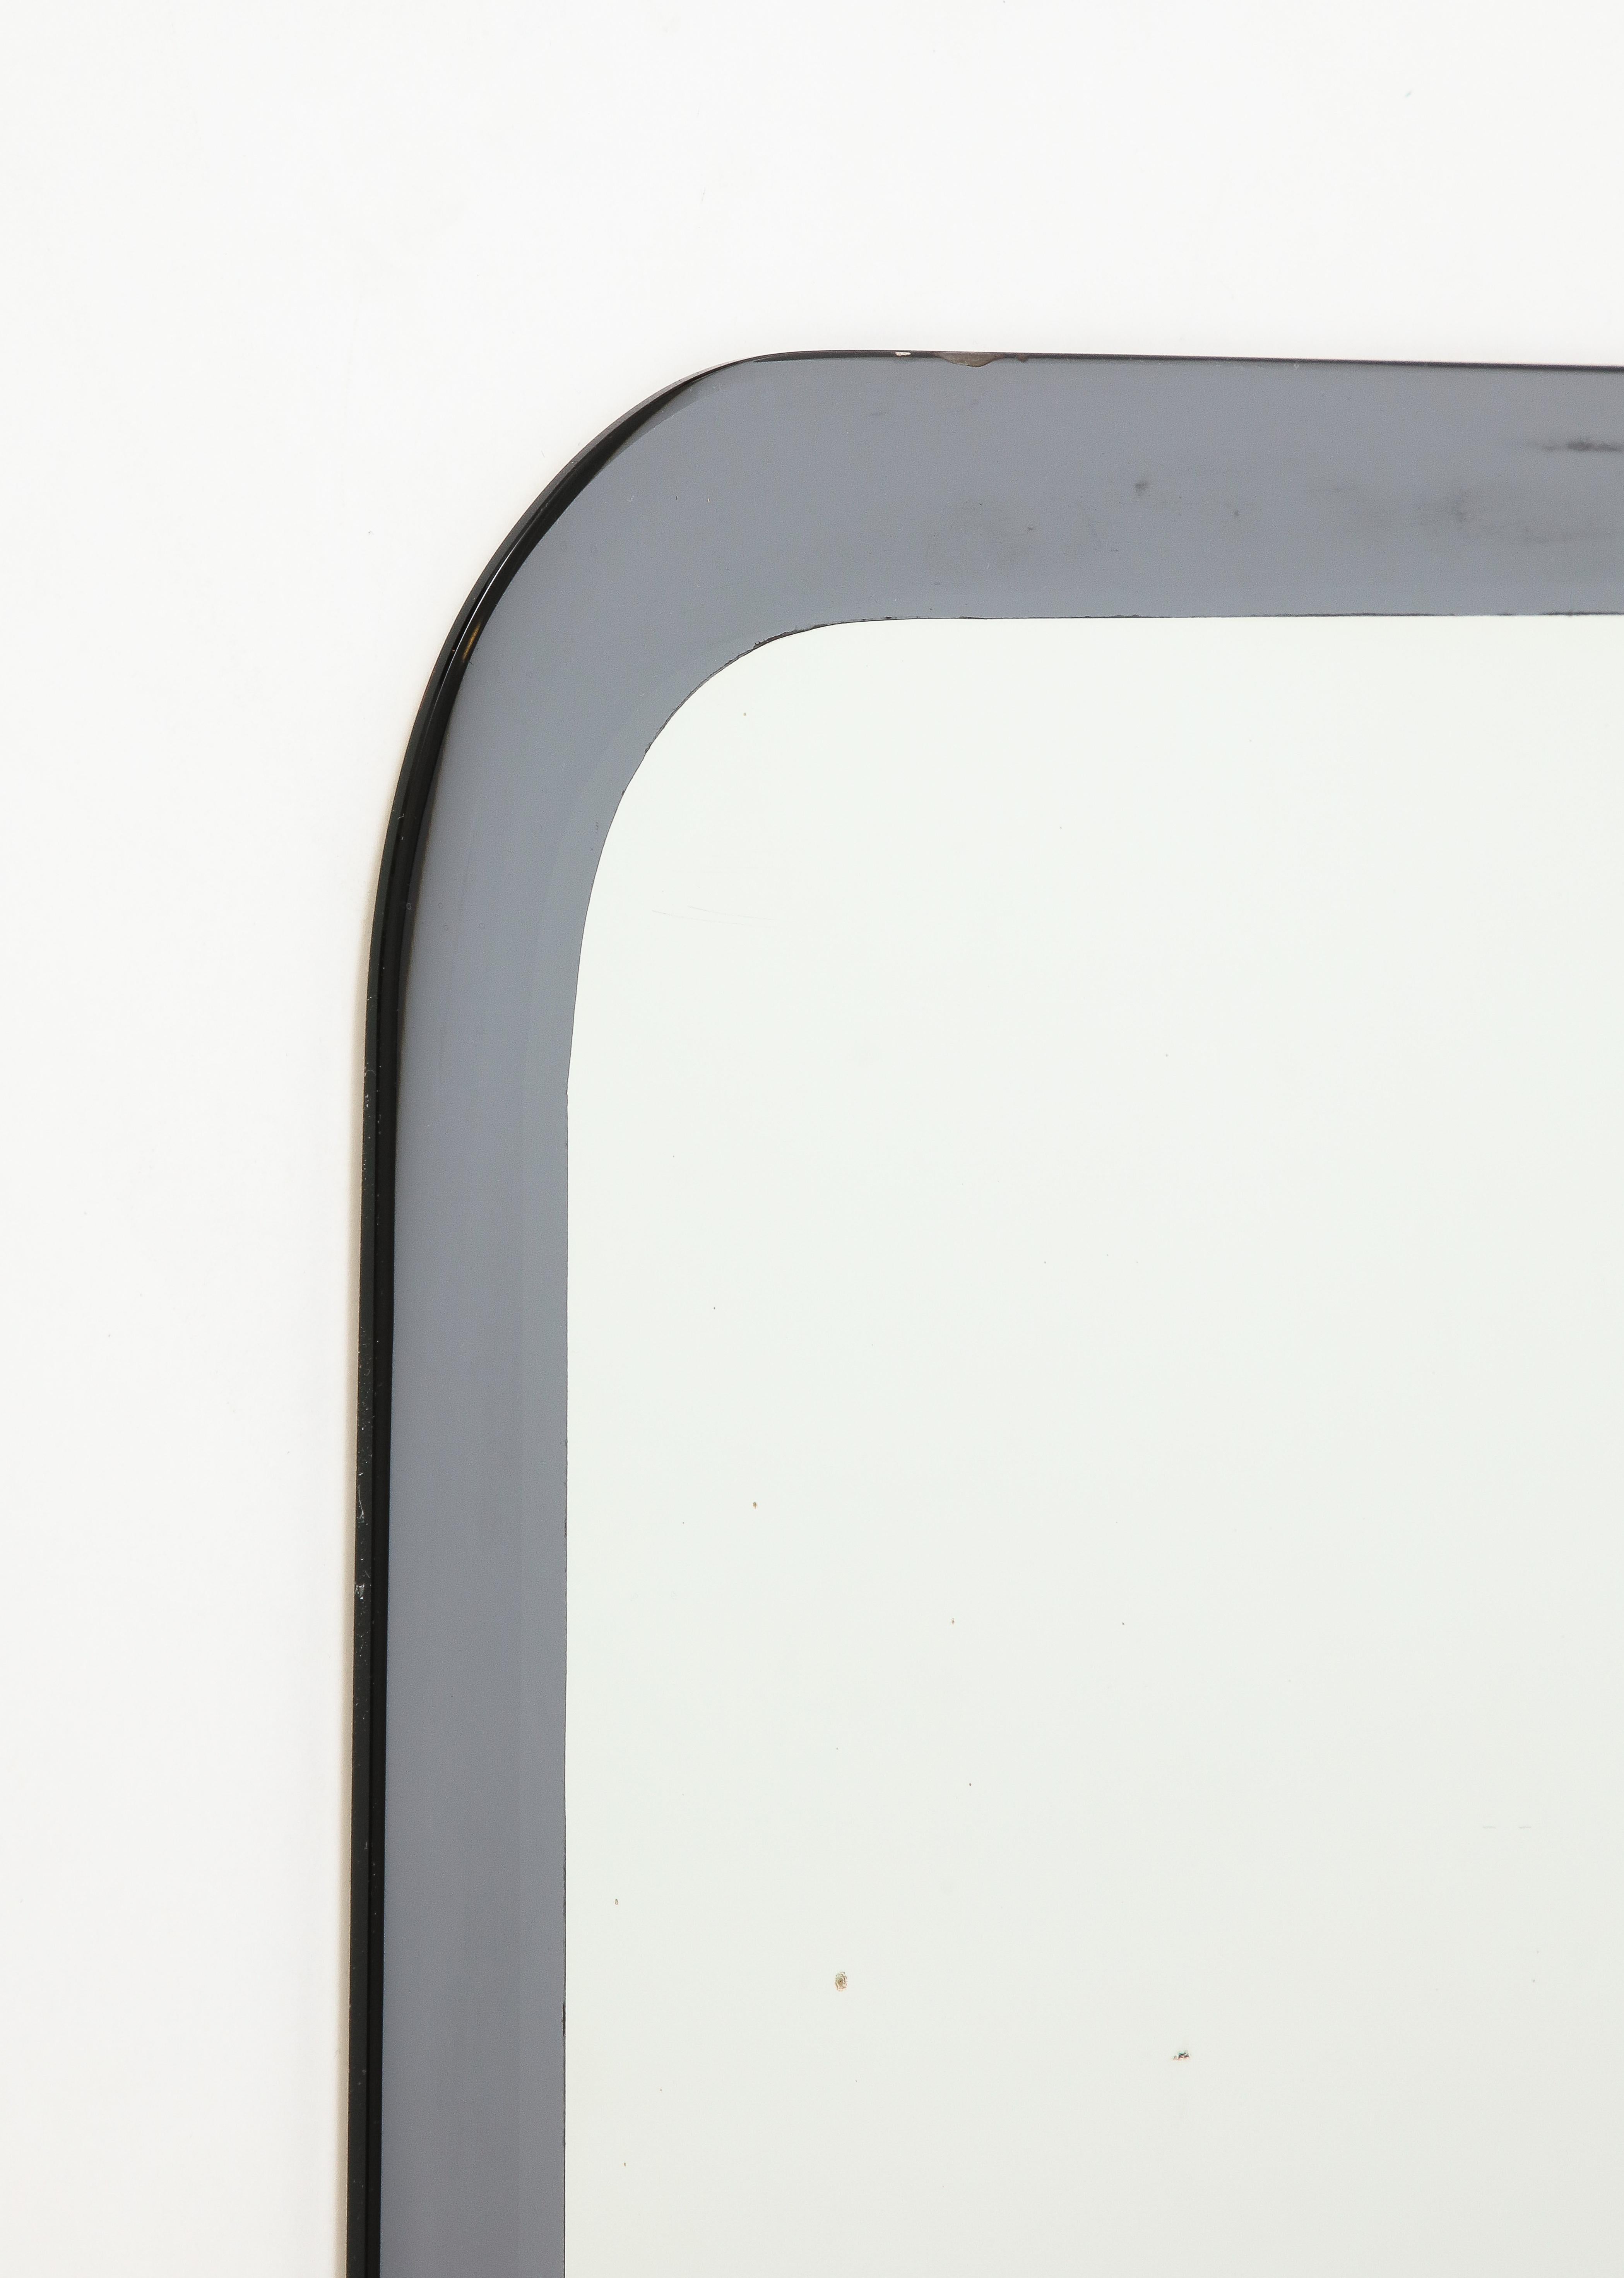 An Italian all glass shaped mirror with silver/grey border made by Metalvetro Galvorame, dated 1967.  The mirror is very well-made and heavy. It comes with its original label signed 